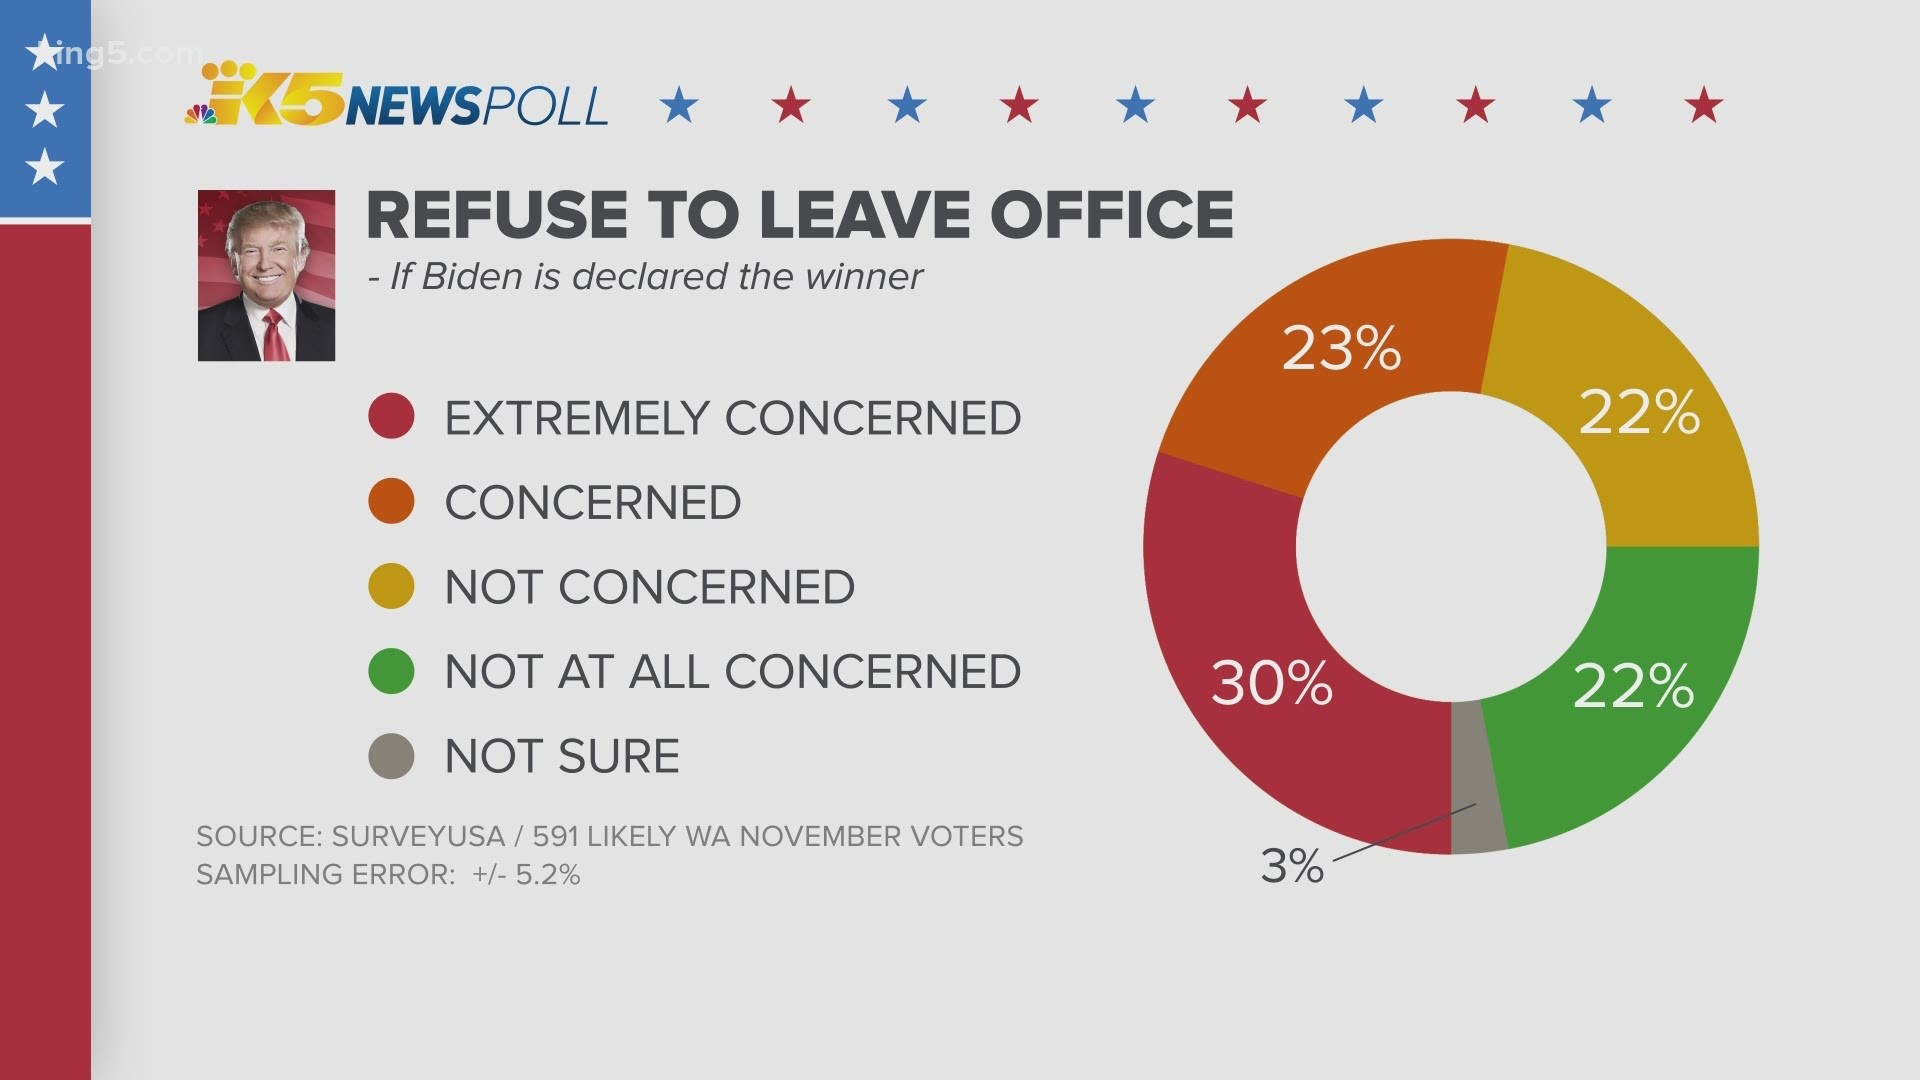 An exclusive KING 5 News poll found 53% of likely Washington voters are concerned President Donald Trump will refuse to leave office if Joe Biden wins the election.